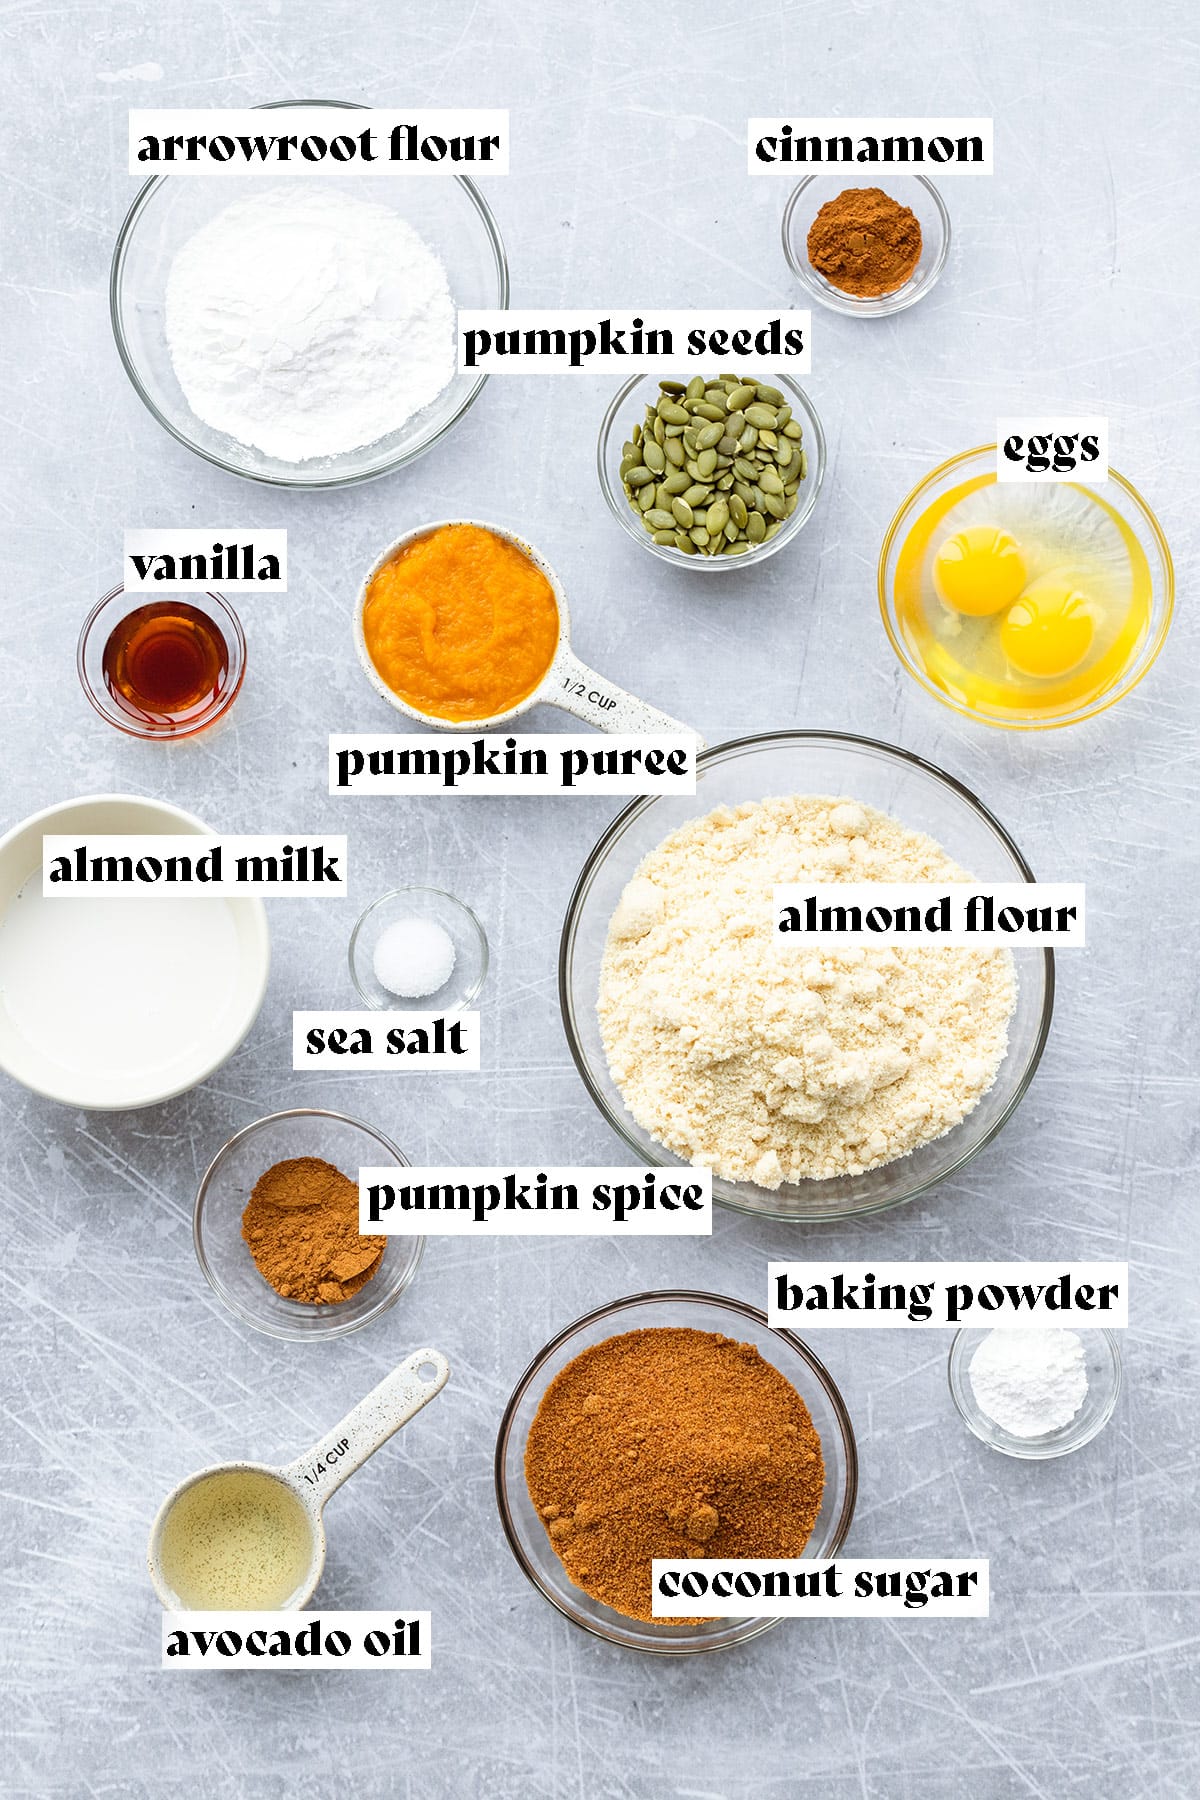 Almond flour, arrowroot flour, pumpkin puree, coconut sugar, and other ingredients on a grey background.